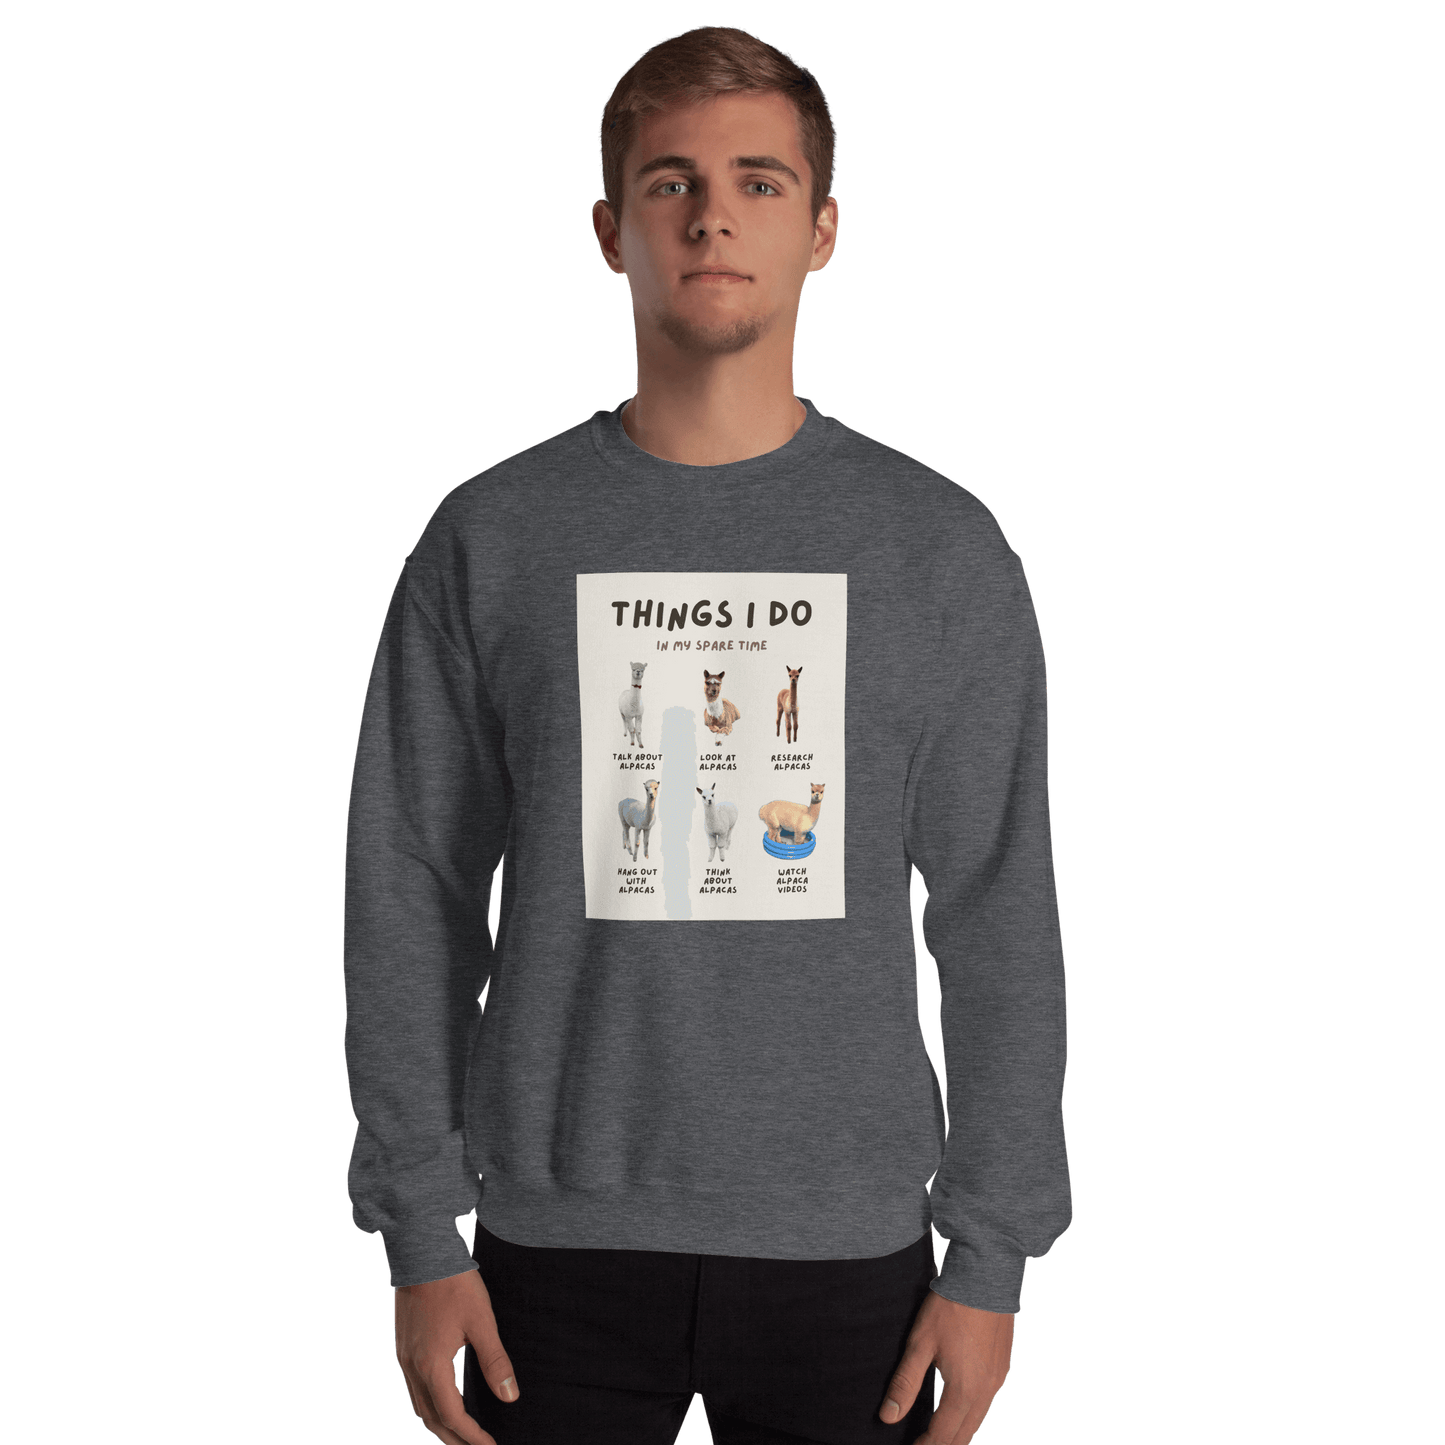 Alpaca Meme Sweater "Things I Do In My Spare Time" | Motif with funny alpaca photos | Ideal for humor-loving alpaca fans